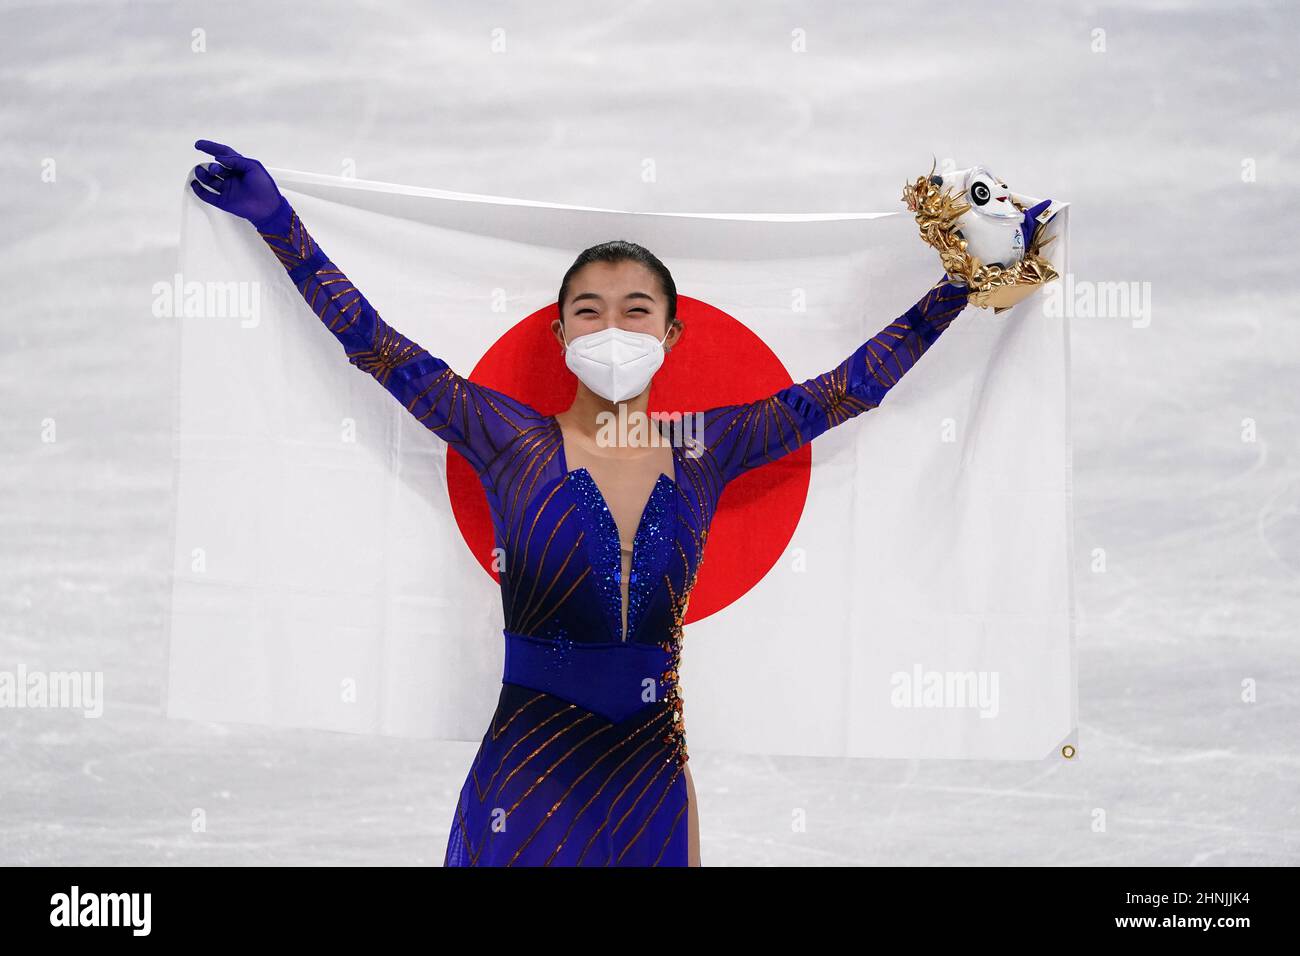 Beijing, China. 17th Feb, 2022. Kaori Sakamoto of Japan, poses with the.Japanese flag and her Bing Dwen Dwen mascot during the venue ceremony for the Women's Single Figure Skating Free Program in the Capital Indoor Stadium at the Beijing 2022 Winter Olympic on Thursday, February 17, 2022. Shcherbakova won the bronze medal. Photo by Richard Ellis/UPI Credit: UPI/Alamy Live News Stock Photo